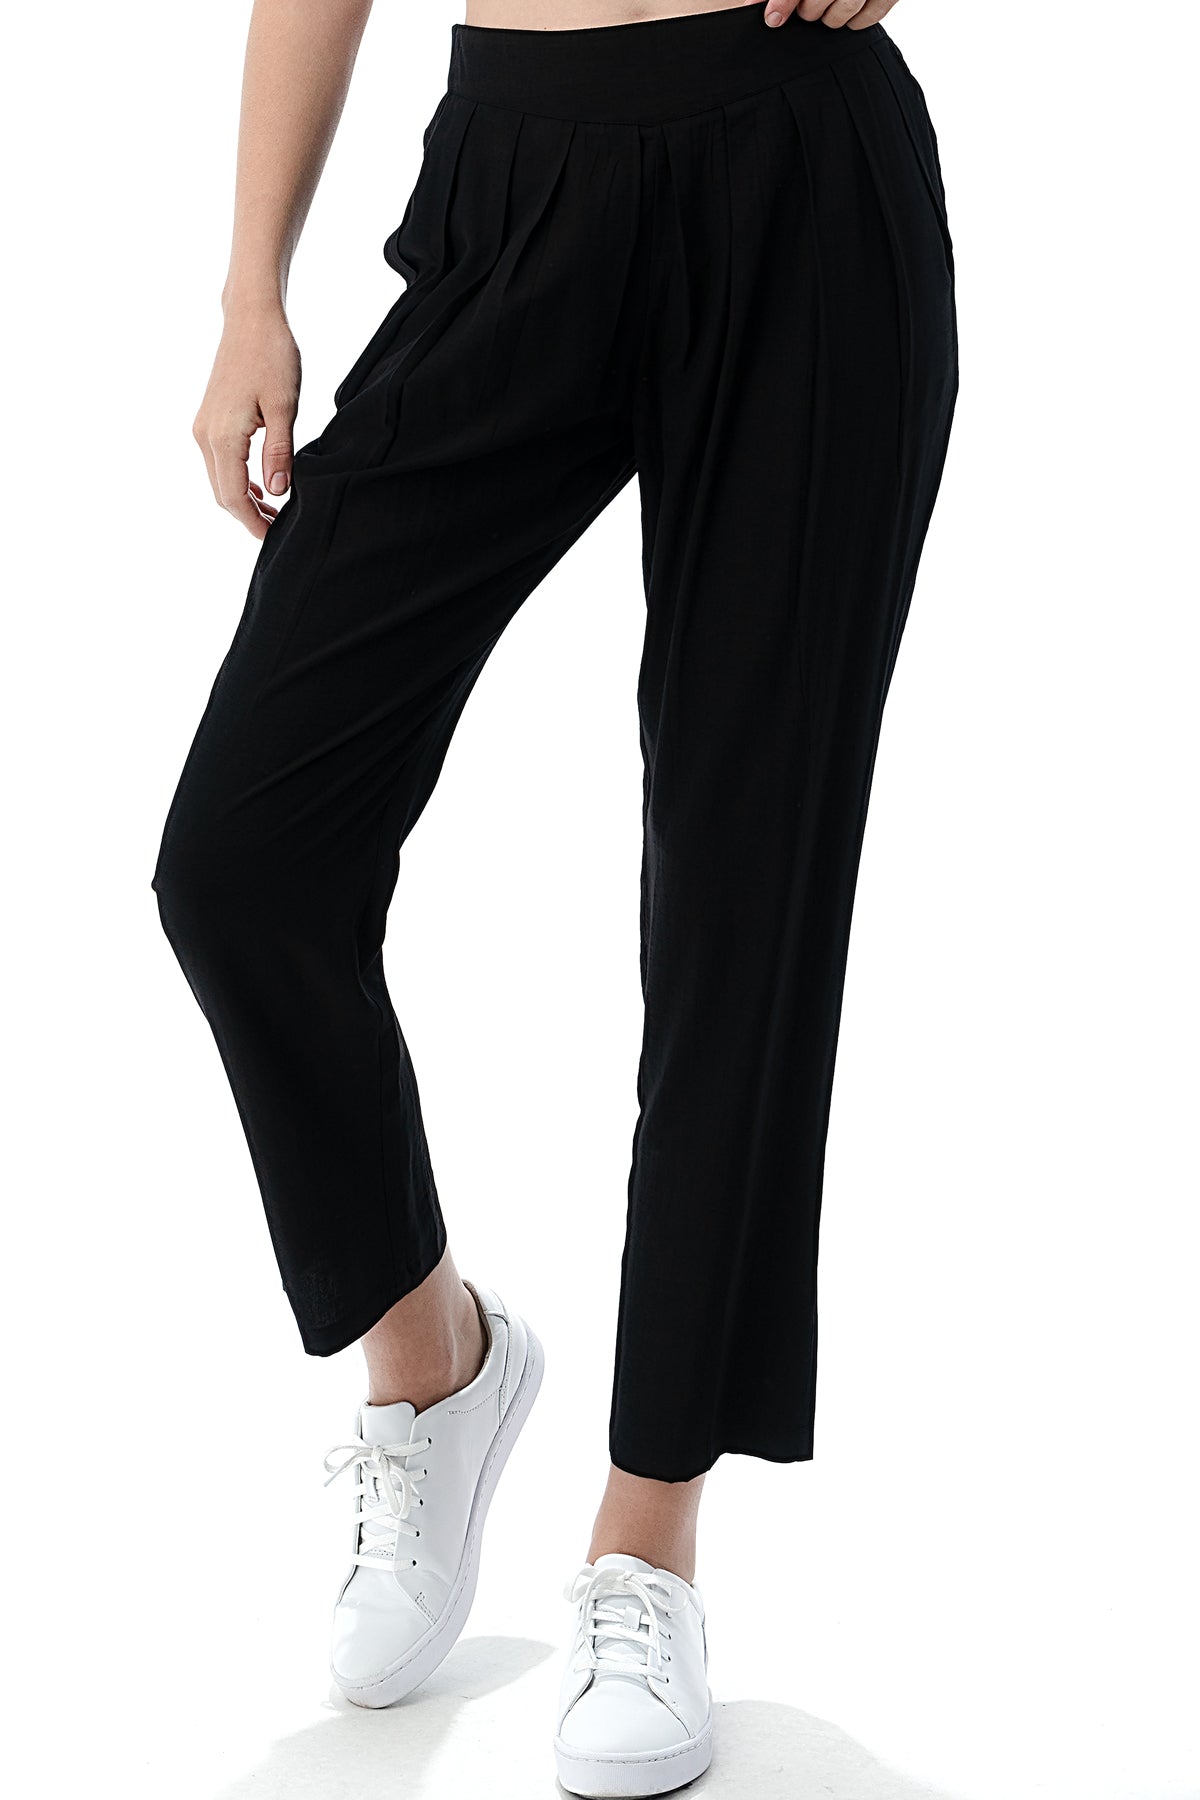 EDGY Land Girl's and Women's Pleated Slim-Sation Smocking Band CroPPEd Pants